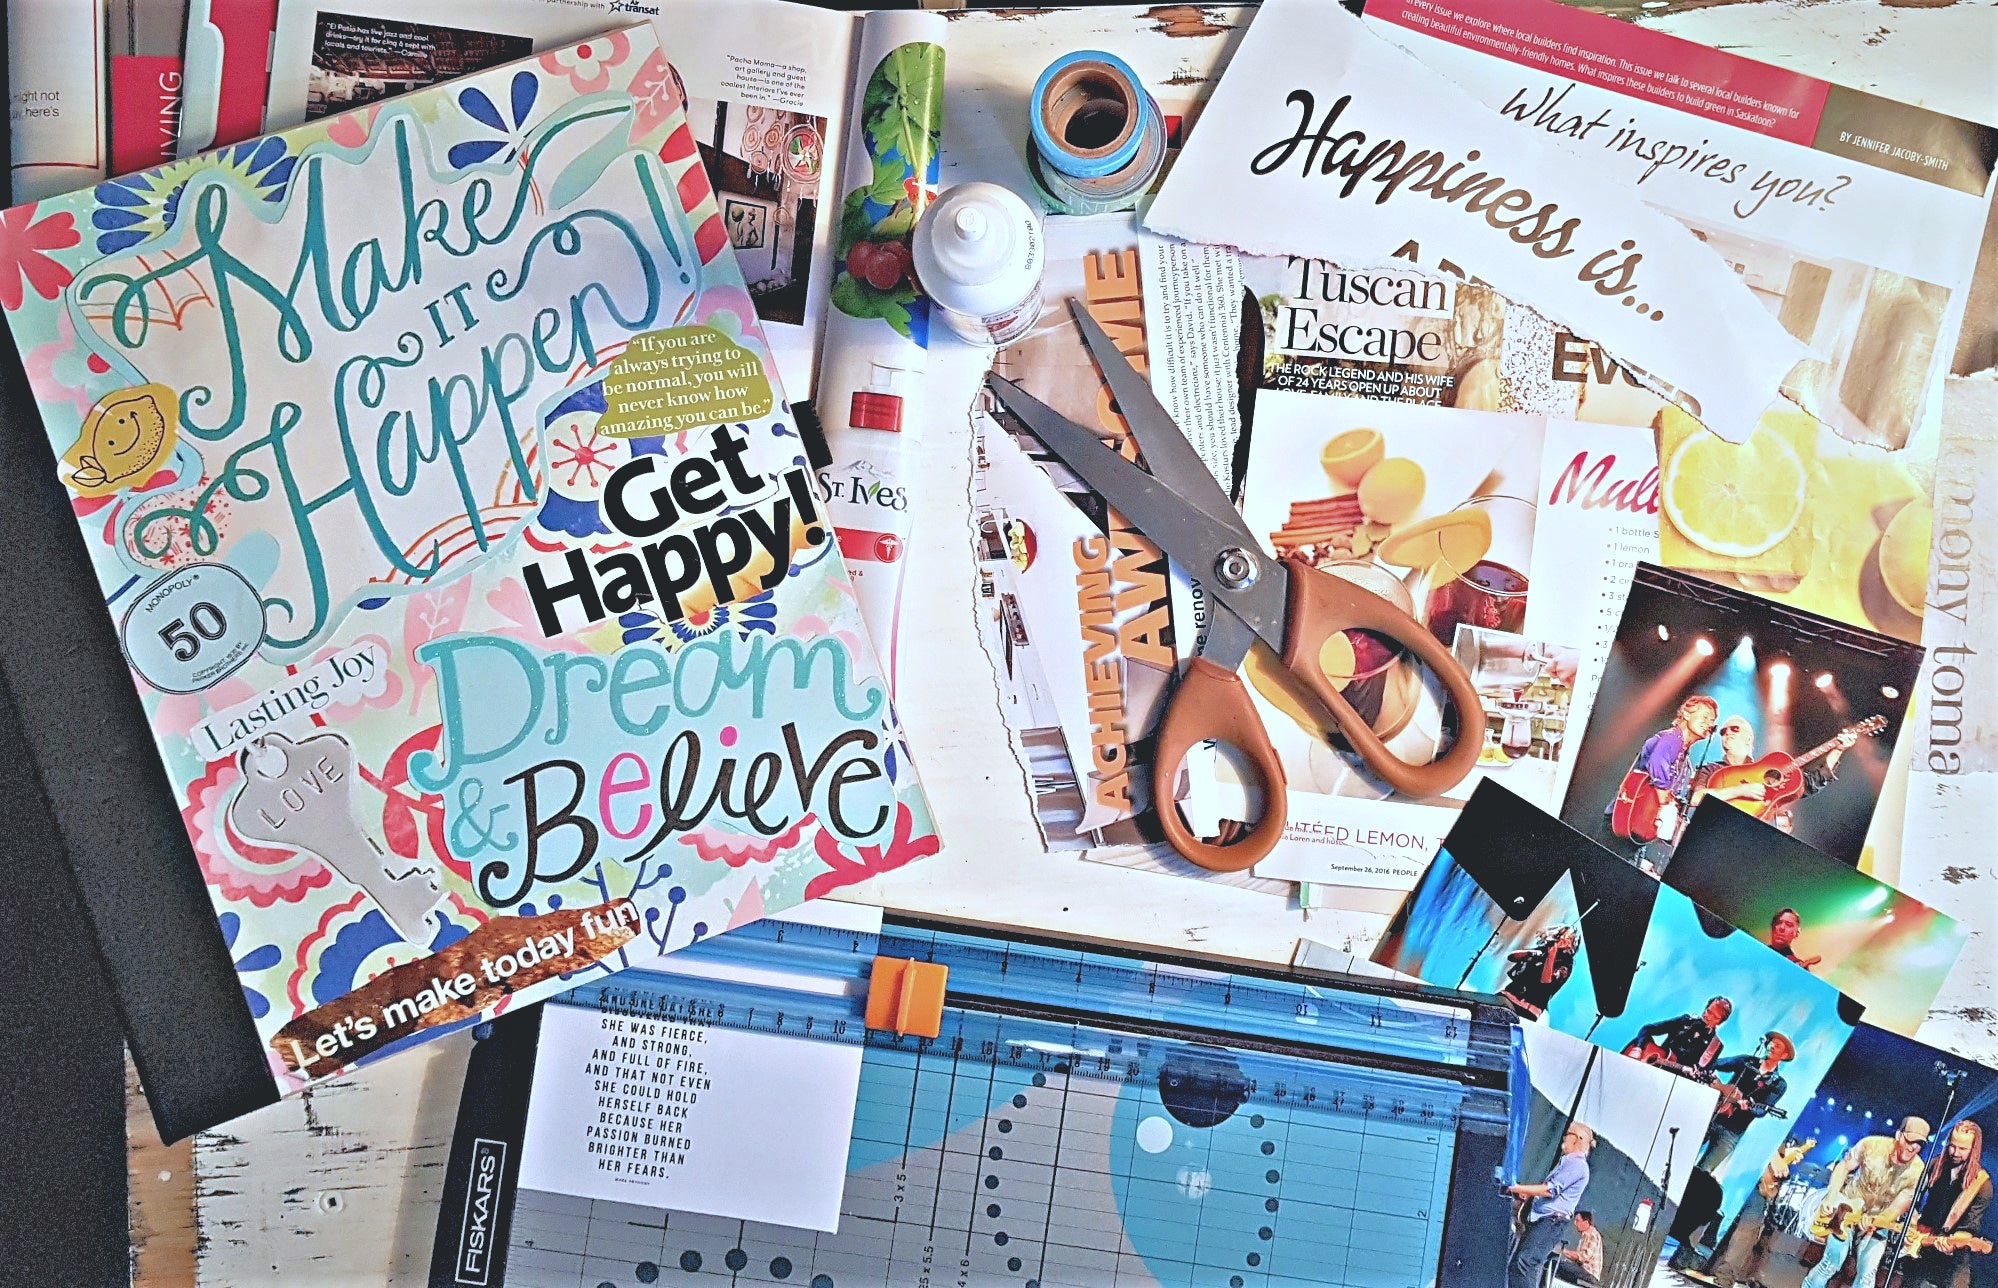 How to make a vision board: Here's one way to help manifest your goals